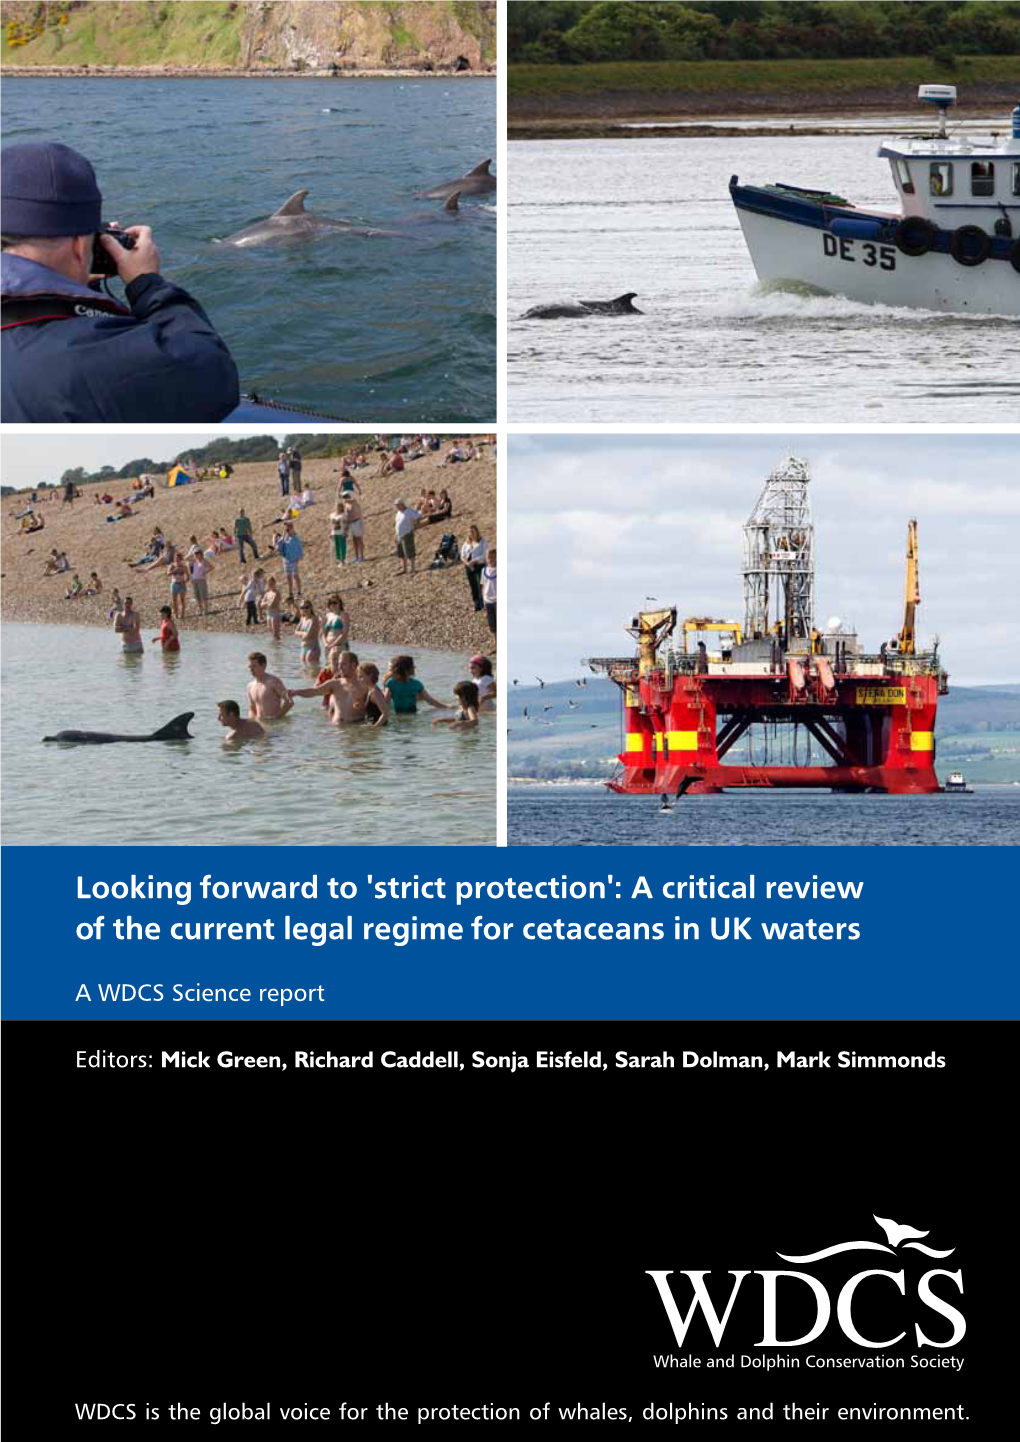 'Strict Protection': a Critical Review of the Current Legal Regime for Cetaceans in UK Waters